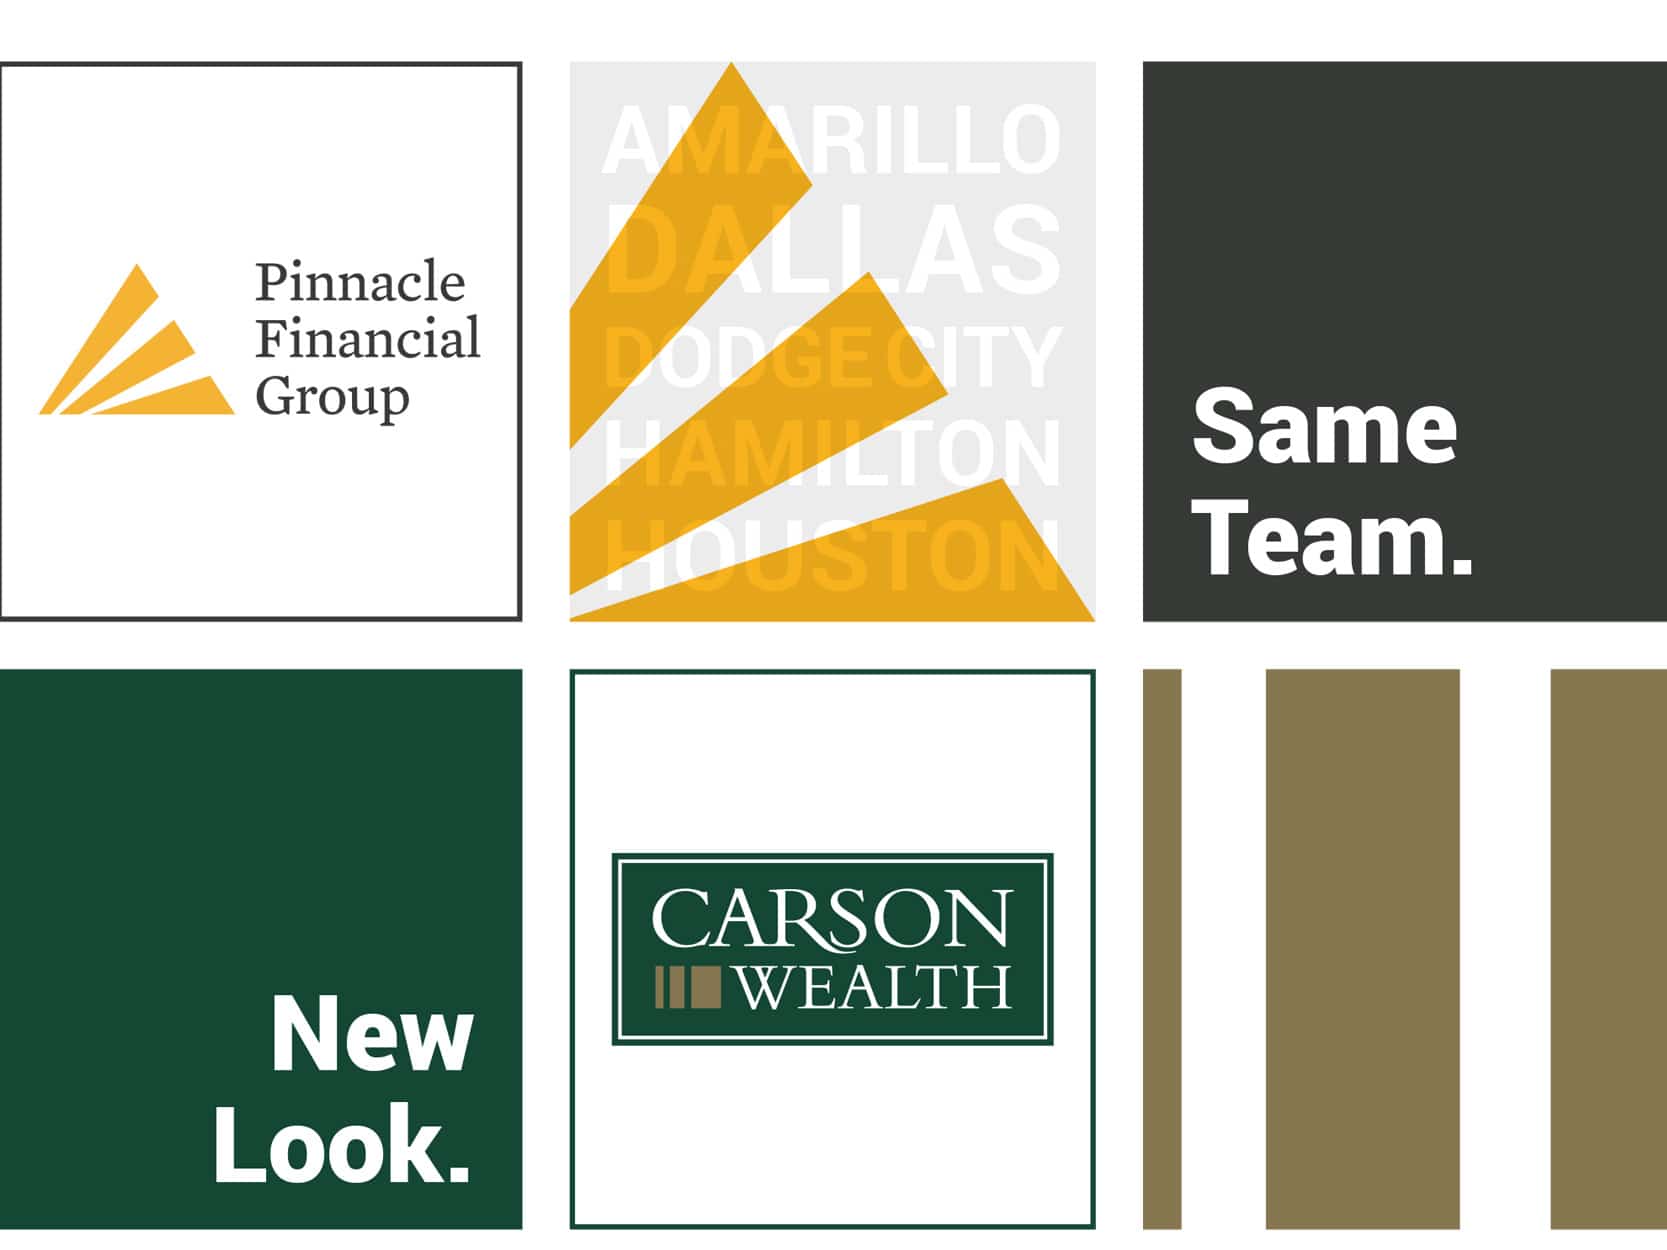 Pinnacle Financial Group to Carson Wealth